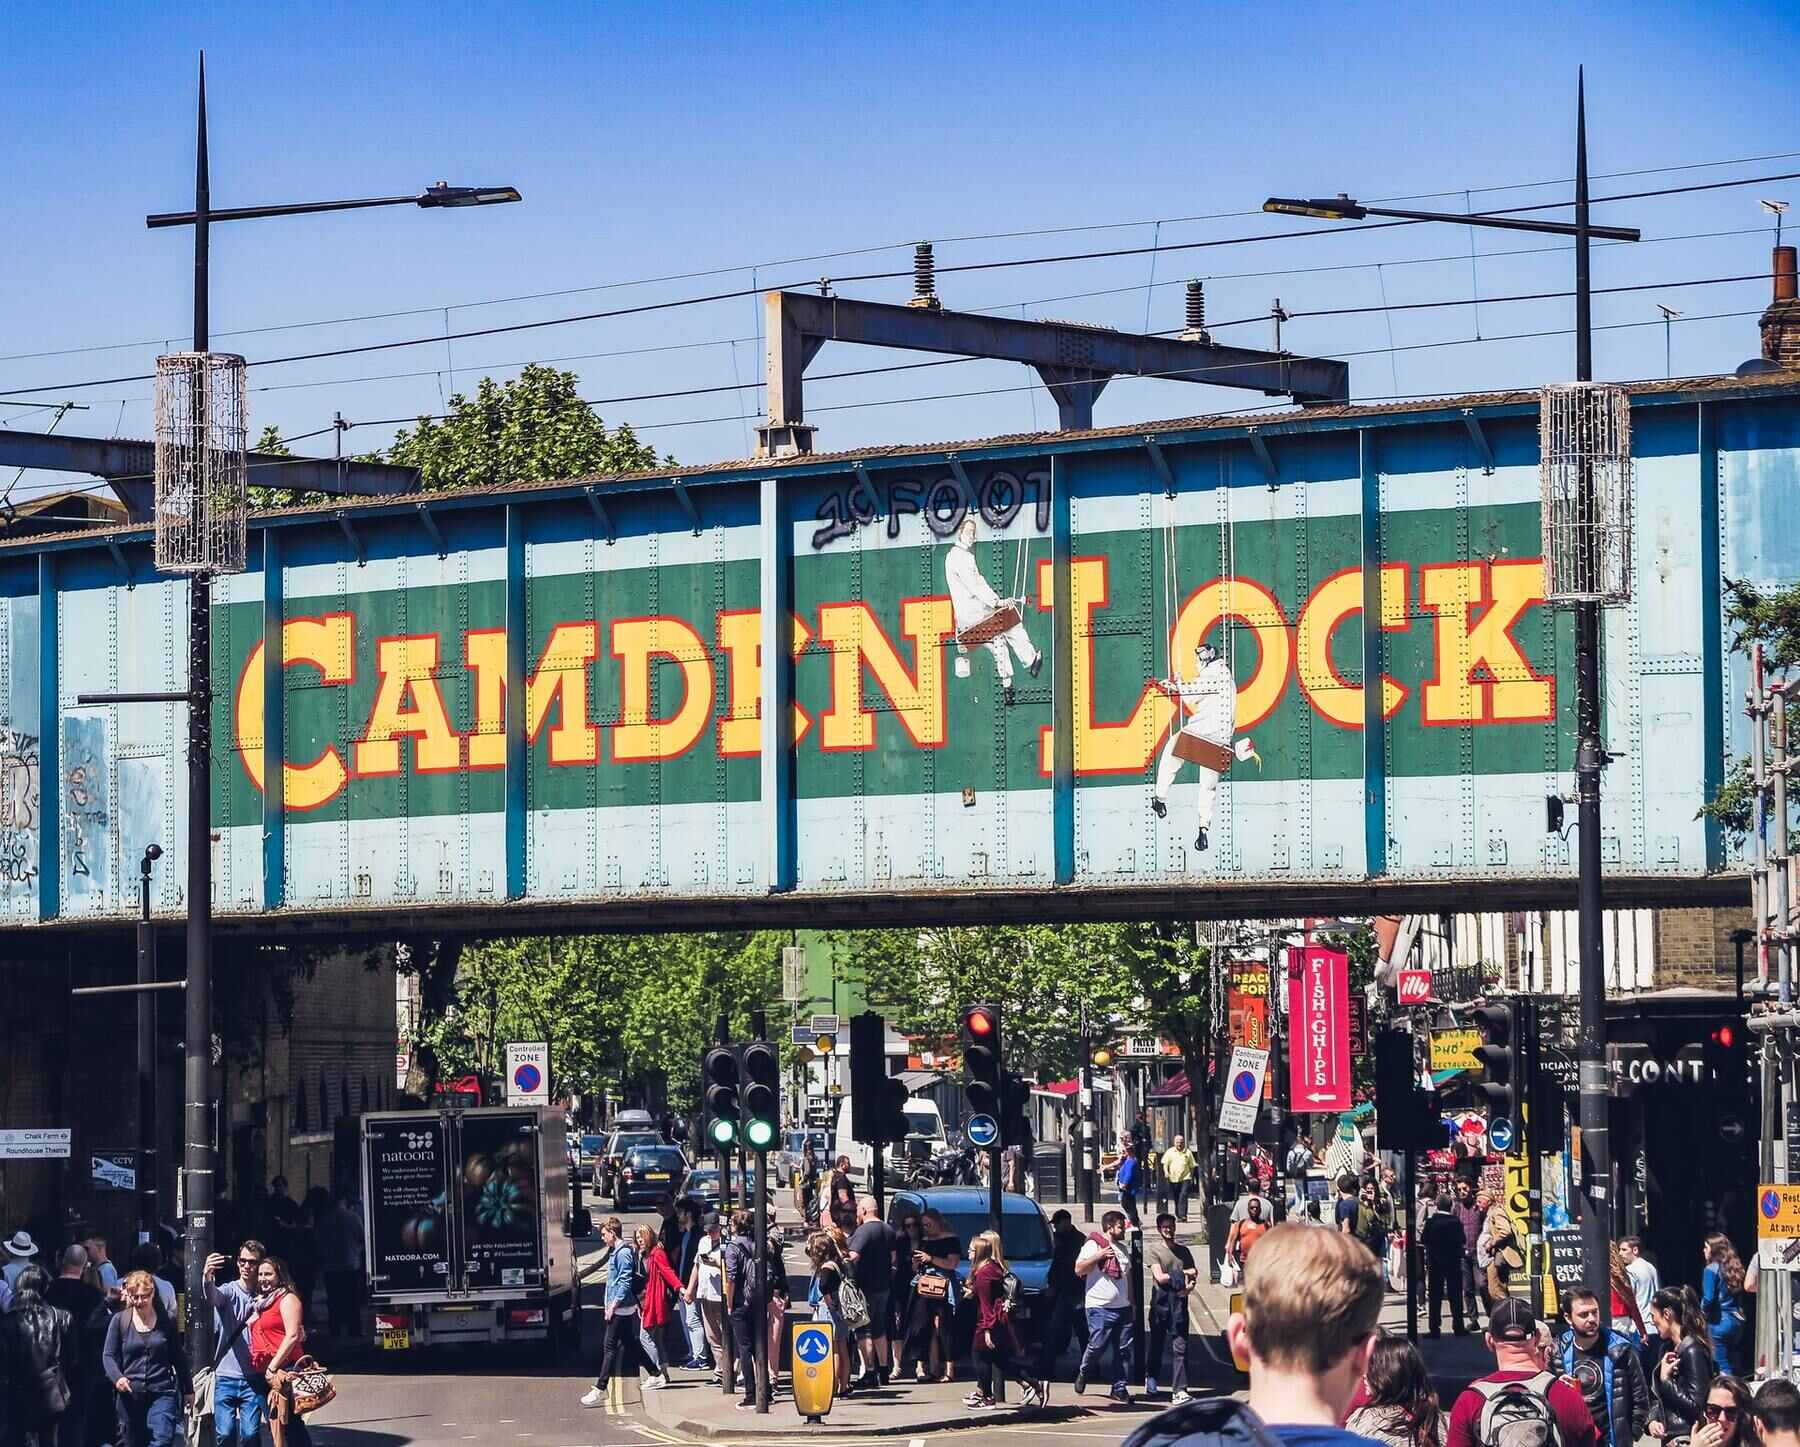 17-mind-blowing-facts-about-camden-lock-market-london